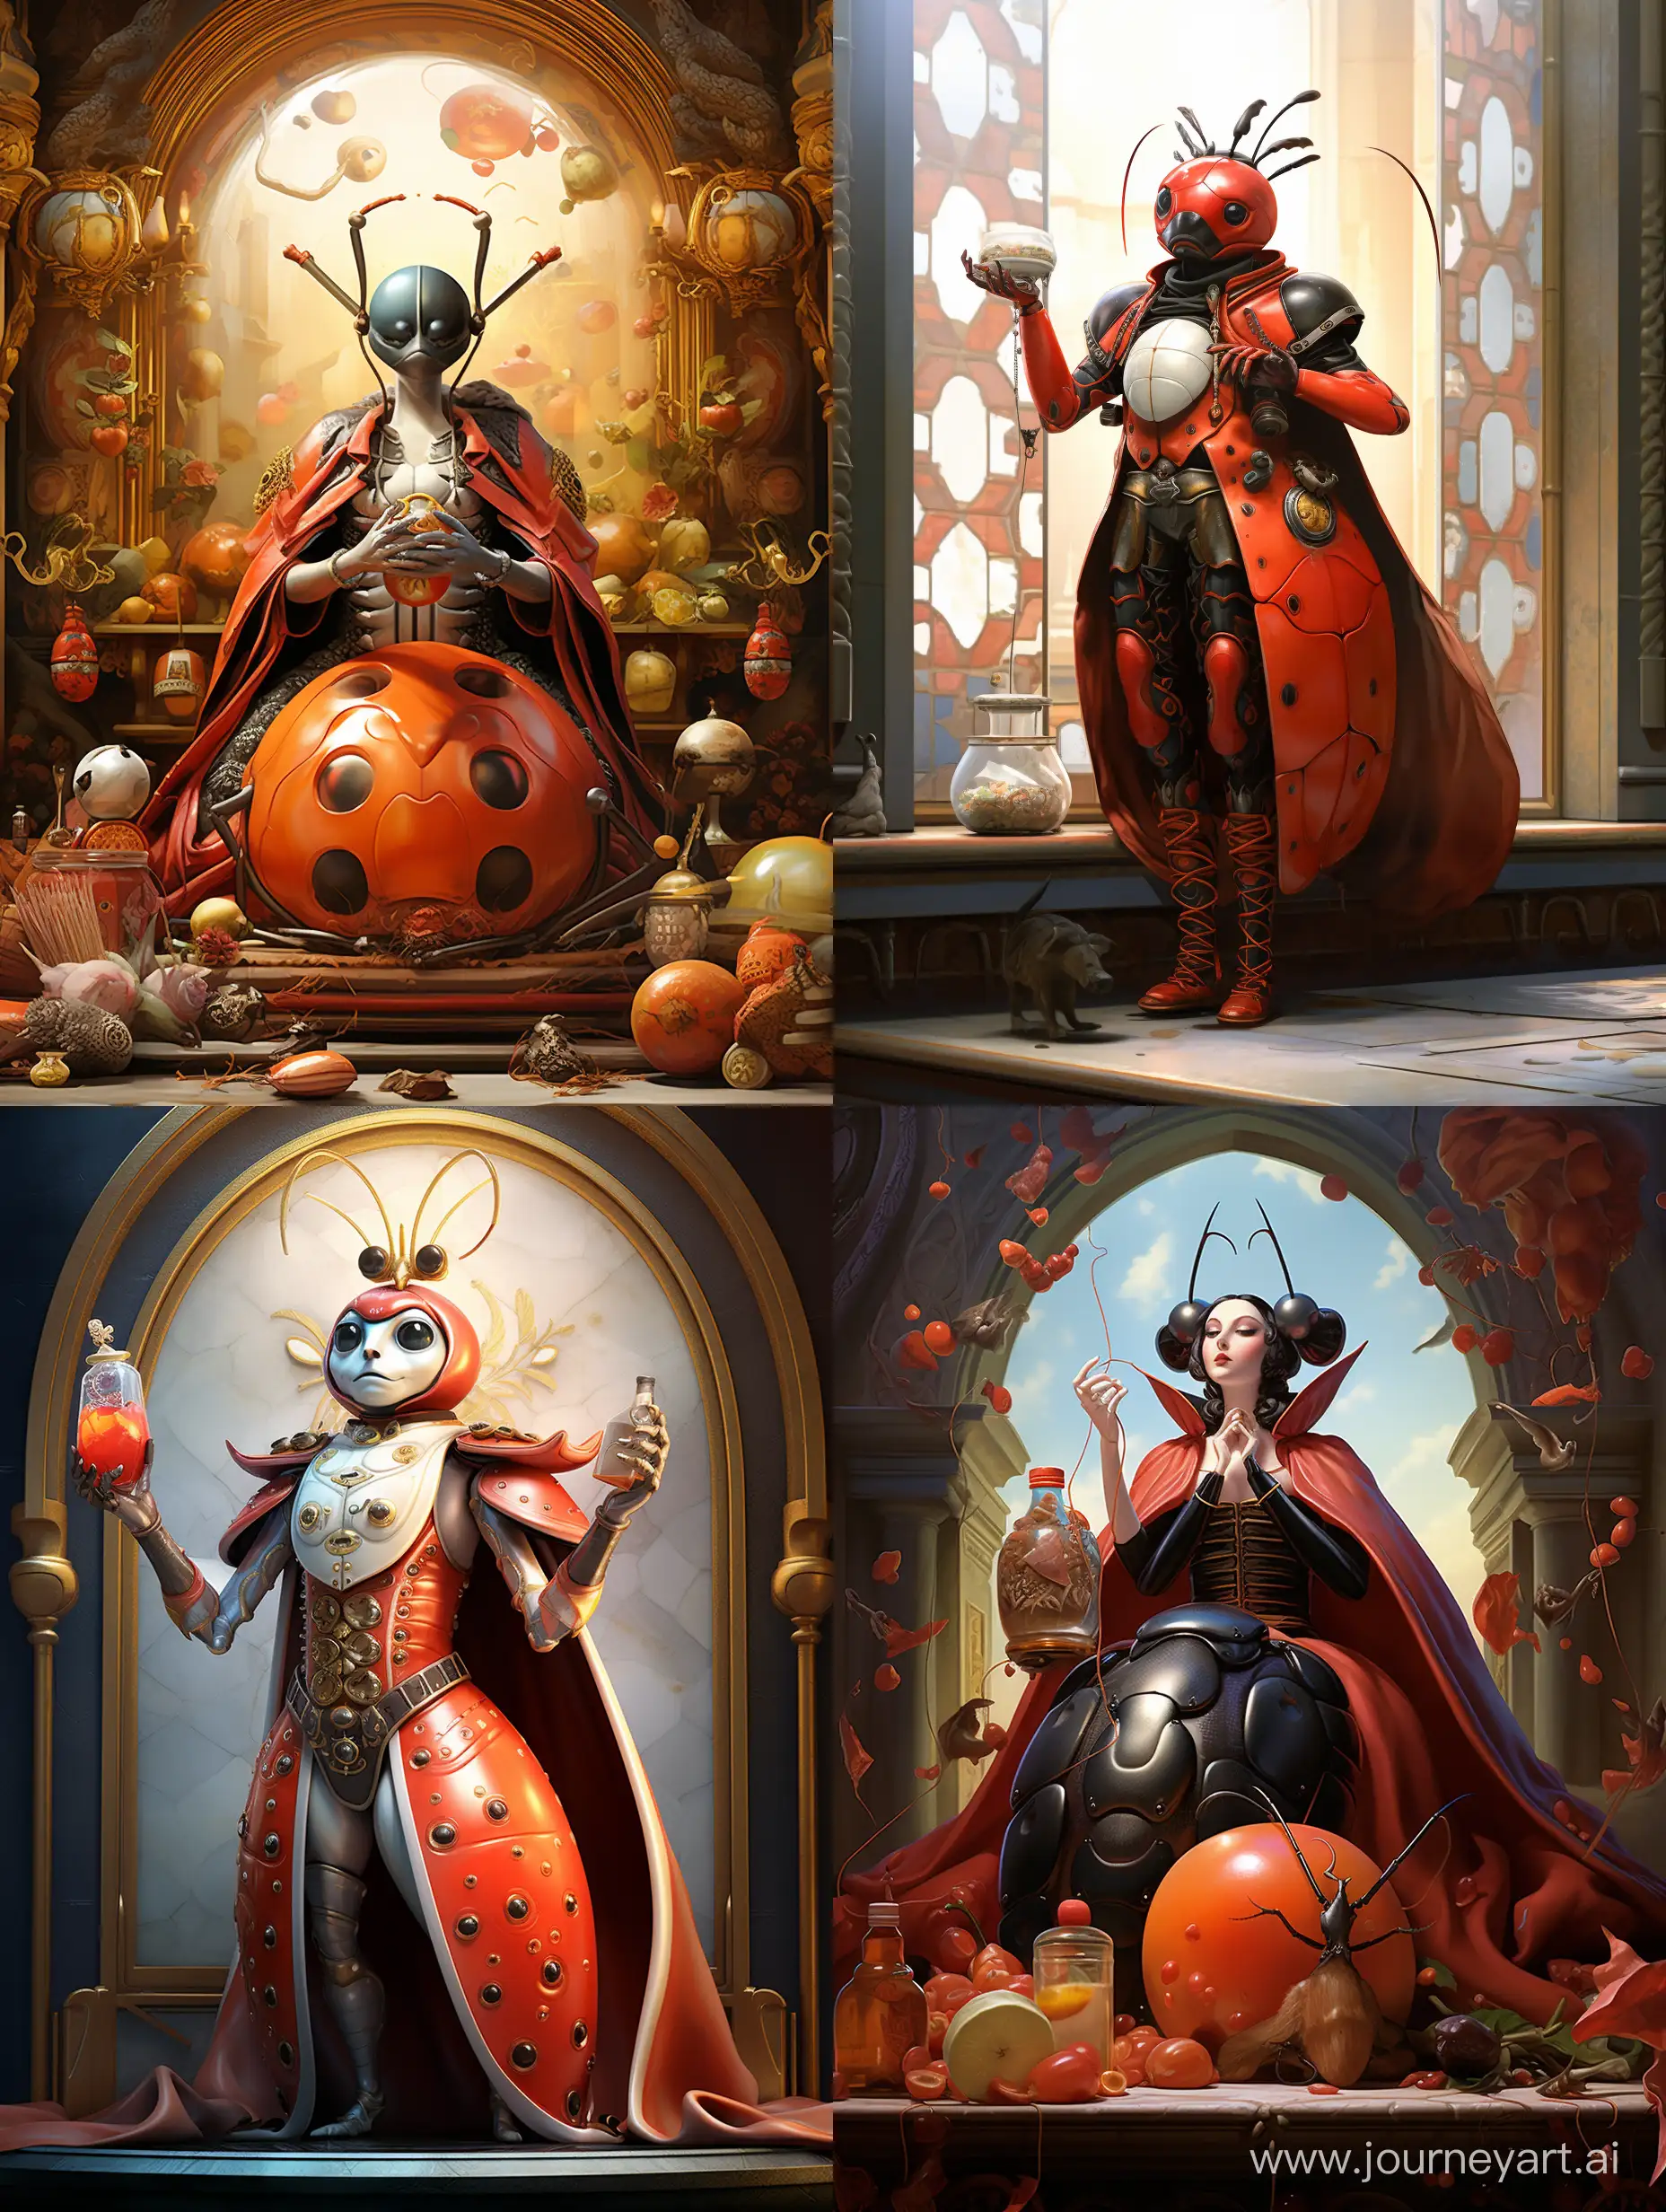 Exquisite-Ladybug-Statue-Holding-Perfume-Detailed-and-Realistic-CG-Art-by-Greg-Hildebrant